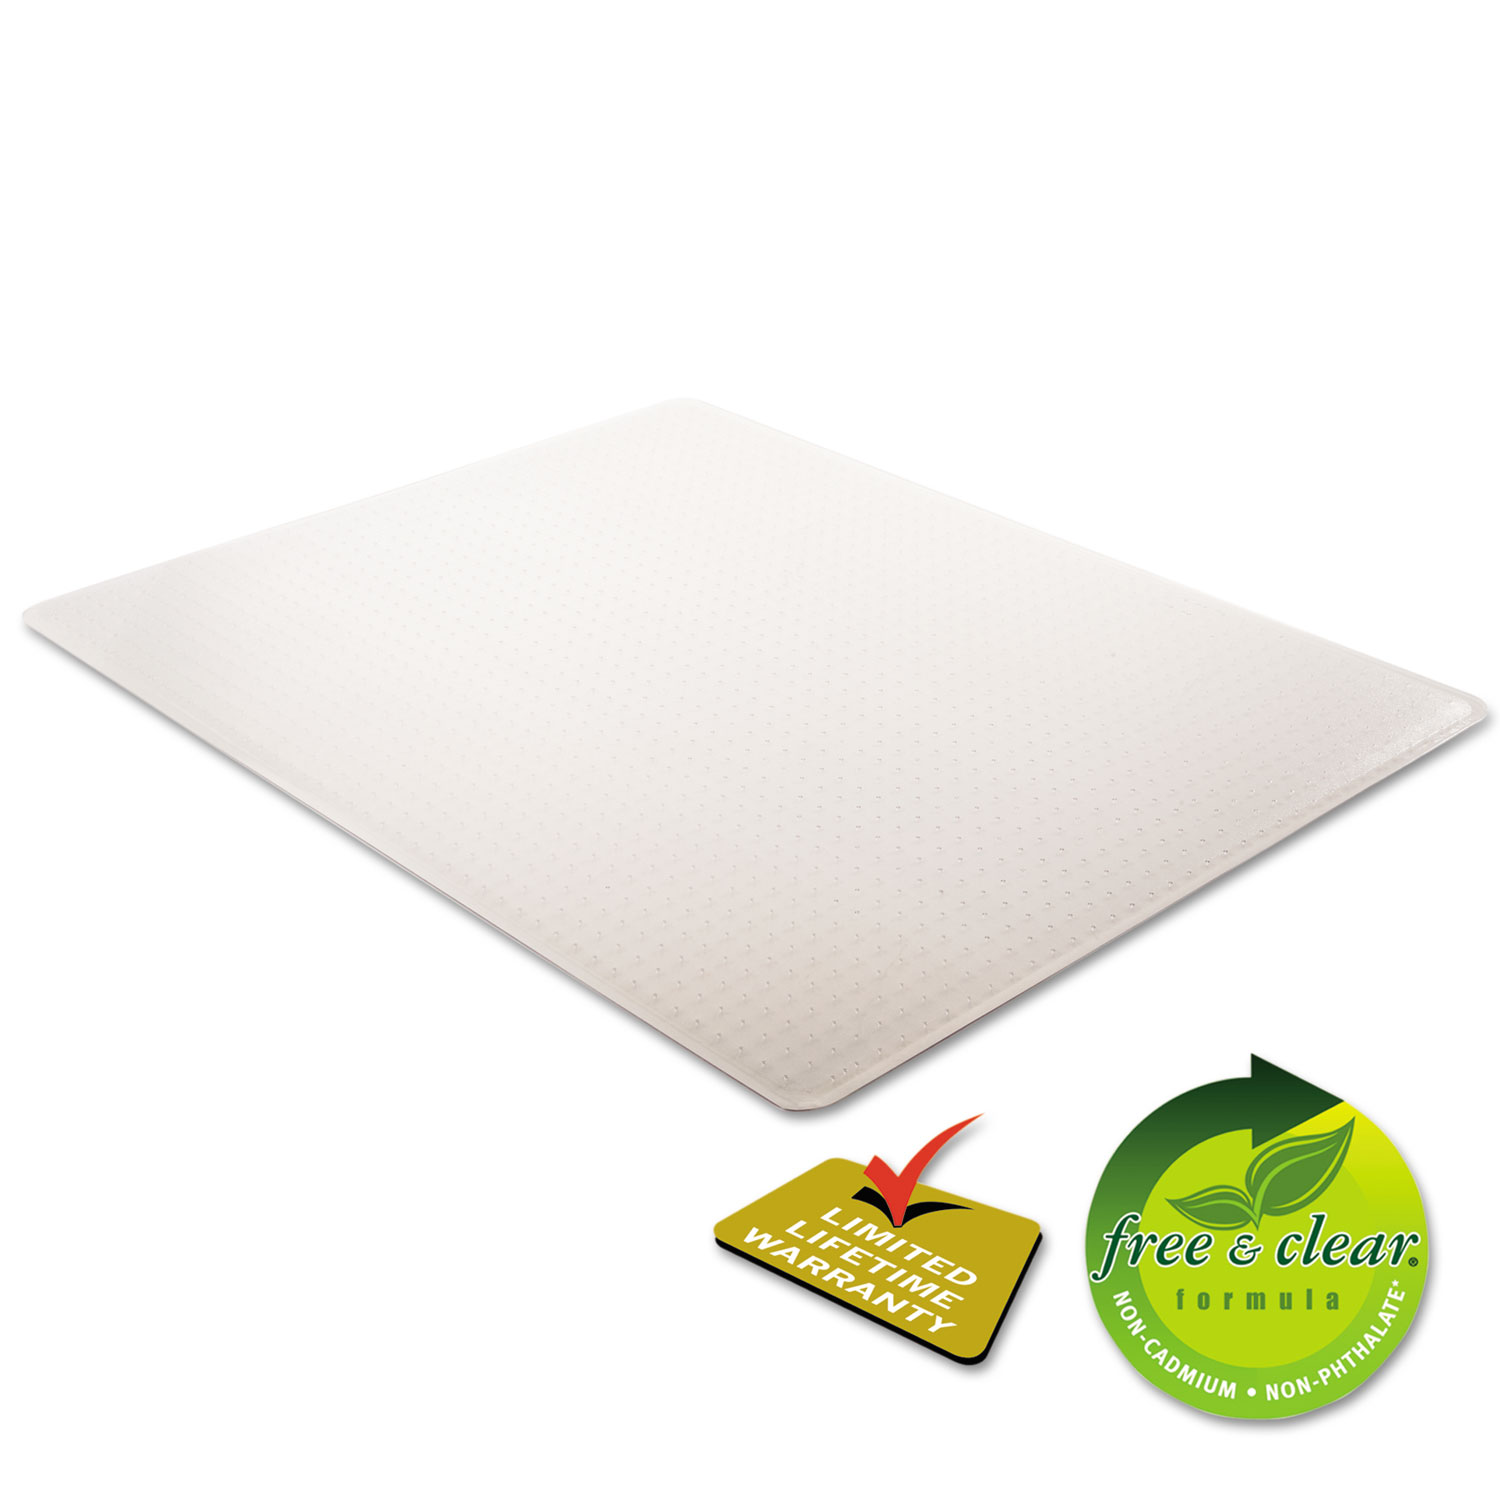 SuperMat Frequent Use Chair Mat, Medium Pile Carpet, Beveled, 46 x 60, Clear